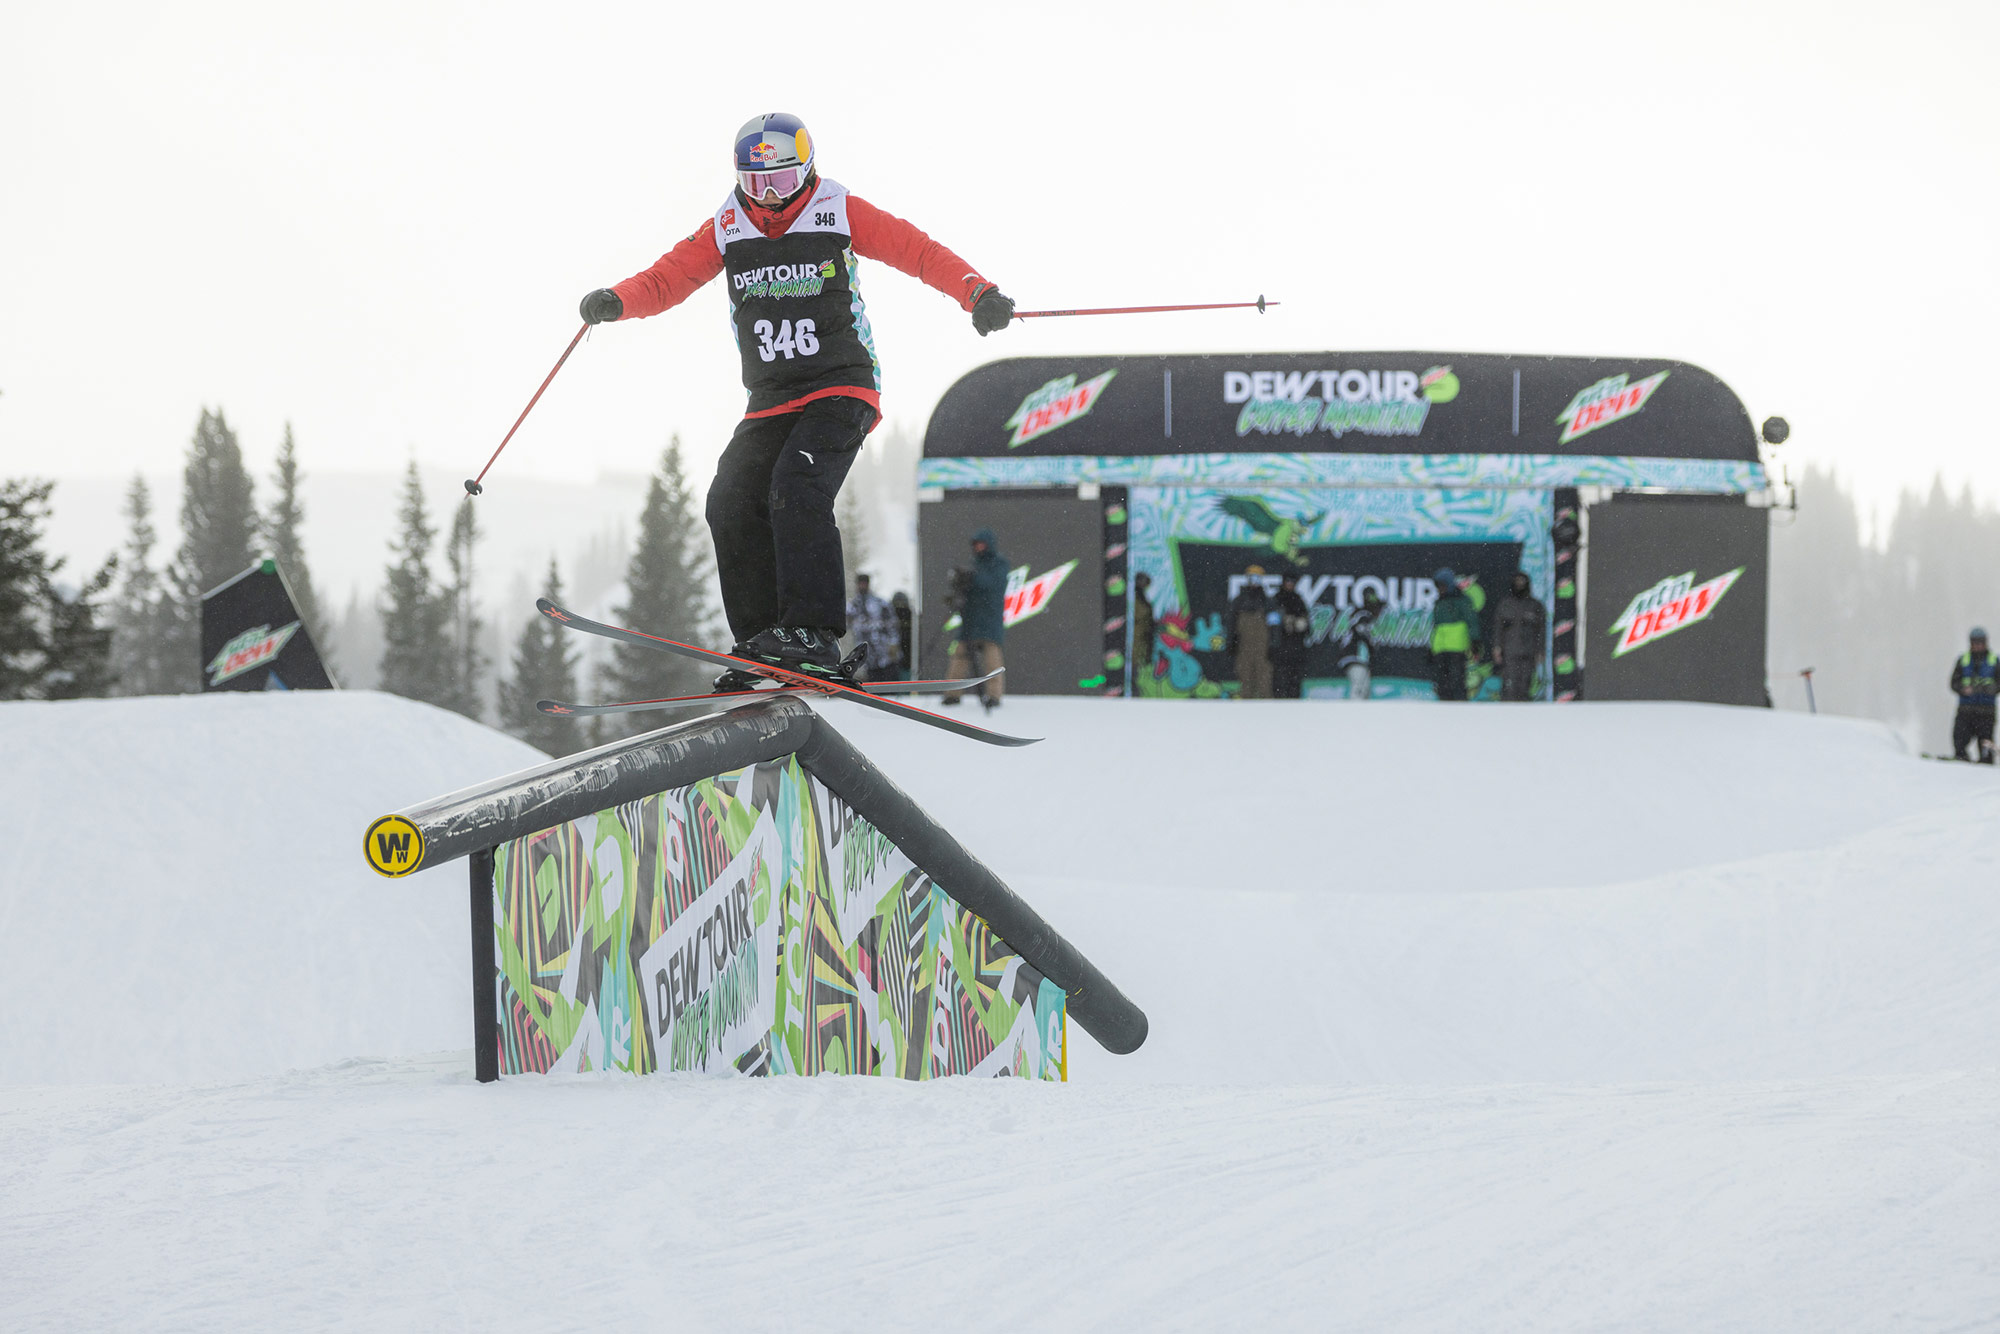 Eileen Gu competes in Womens ski slopestyle at the 2021 Winter Dew Tour in Copper, Colorado.